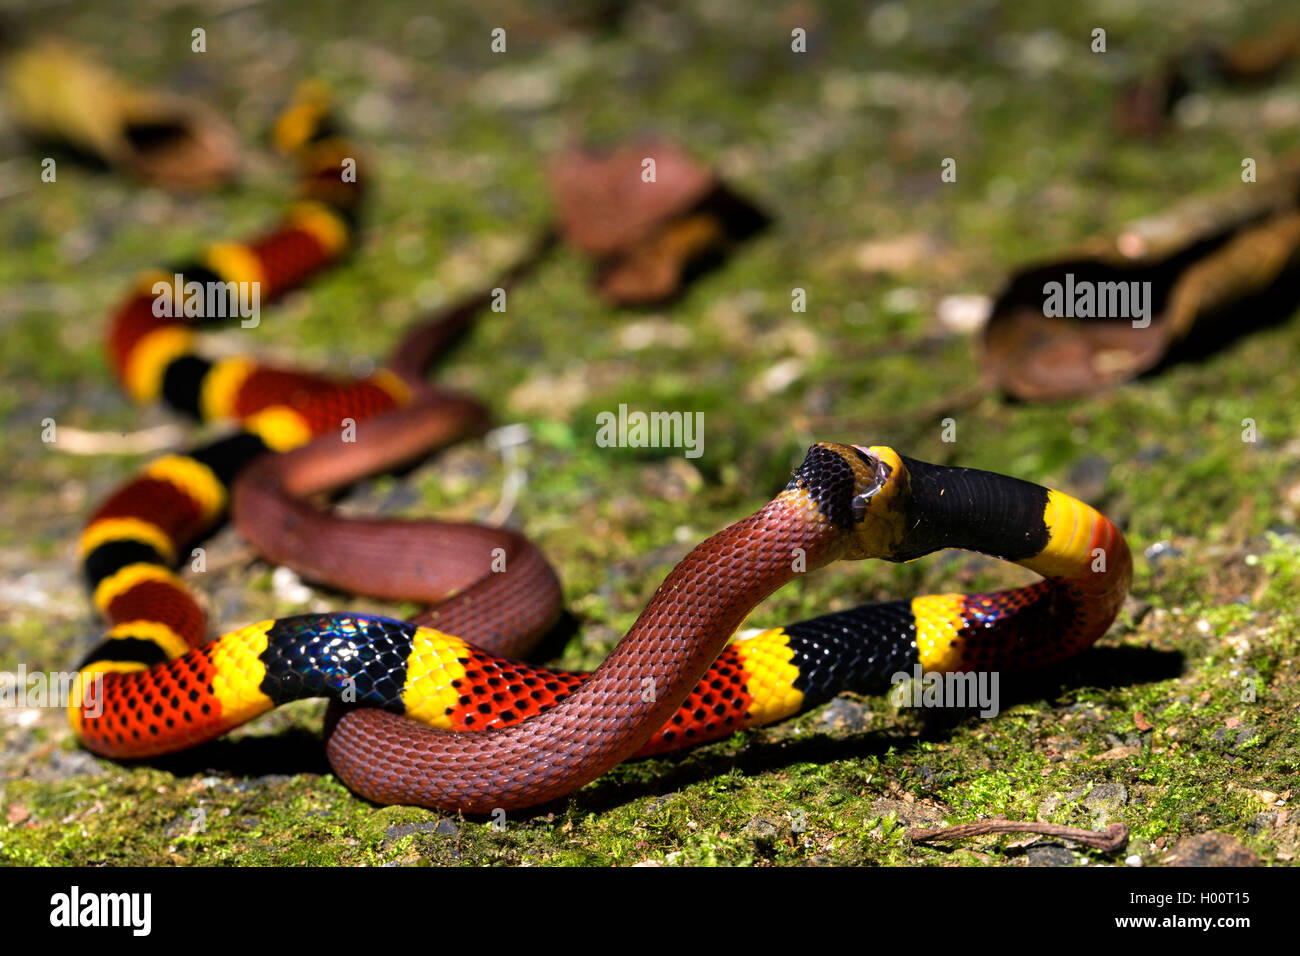 Costa Rican Coral Snake (Micrurus mosquitensis), feeding on Red Coffee Snake, Costa Rica Stock Photo